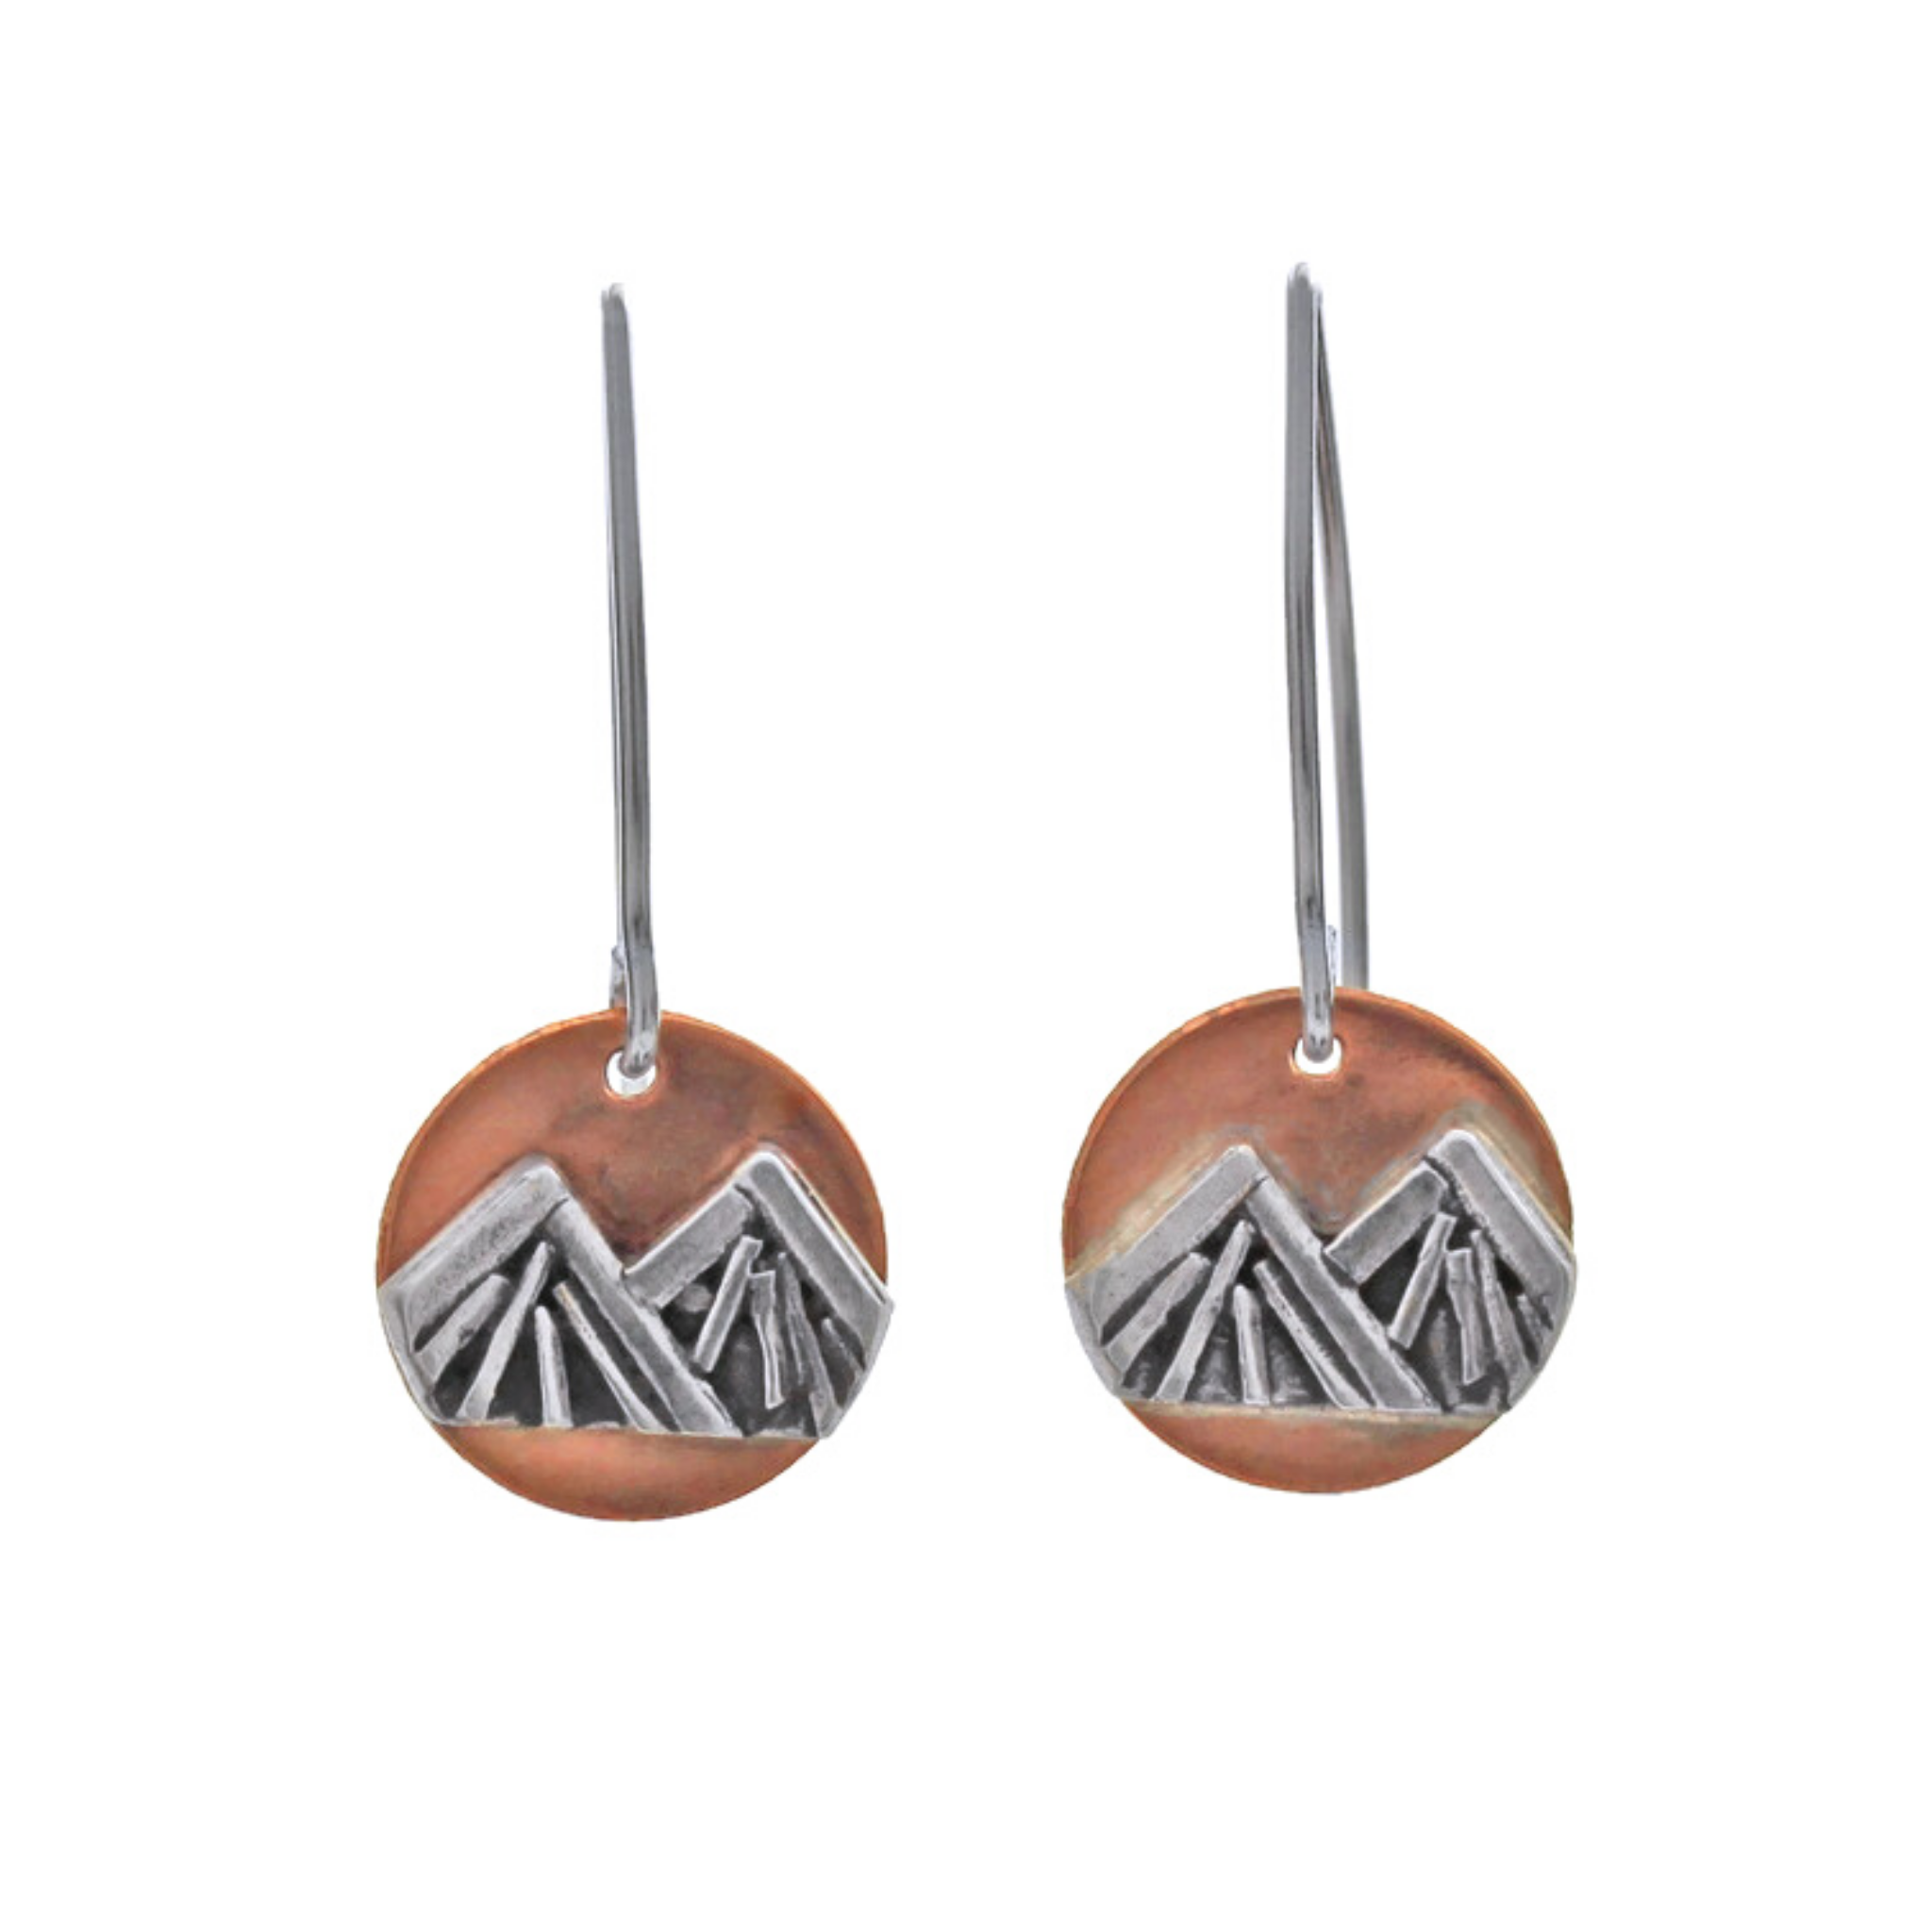 Handmade Mountain Circle Winter Copper and Sterling Silver Earrings